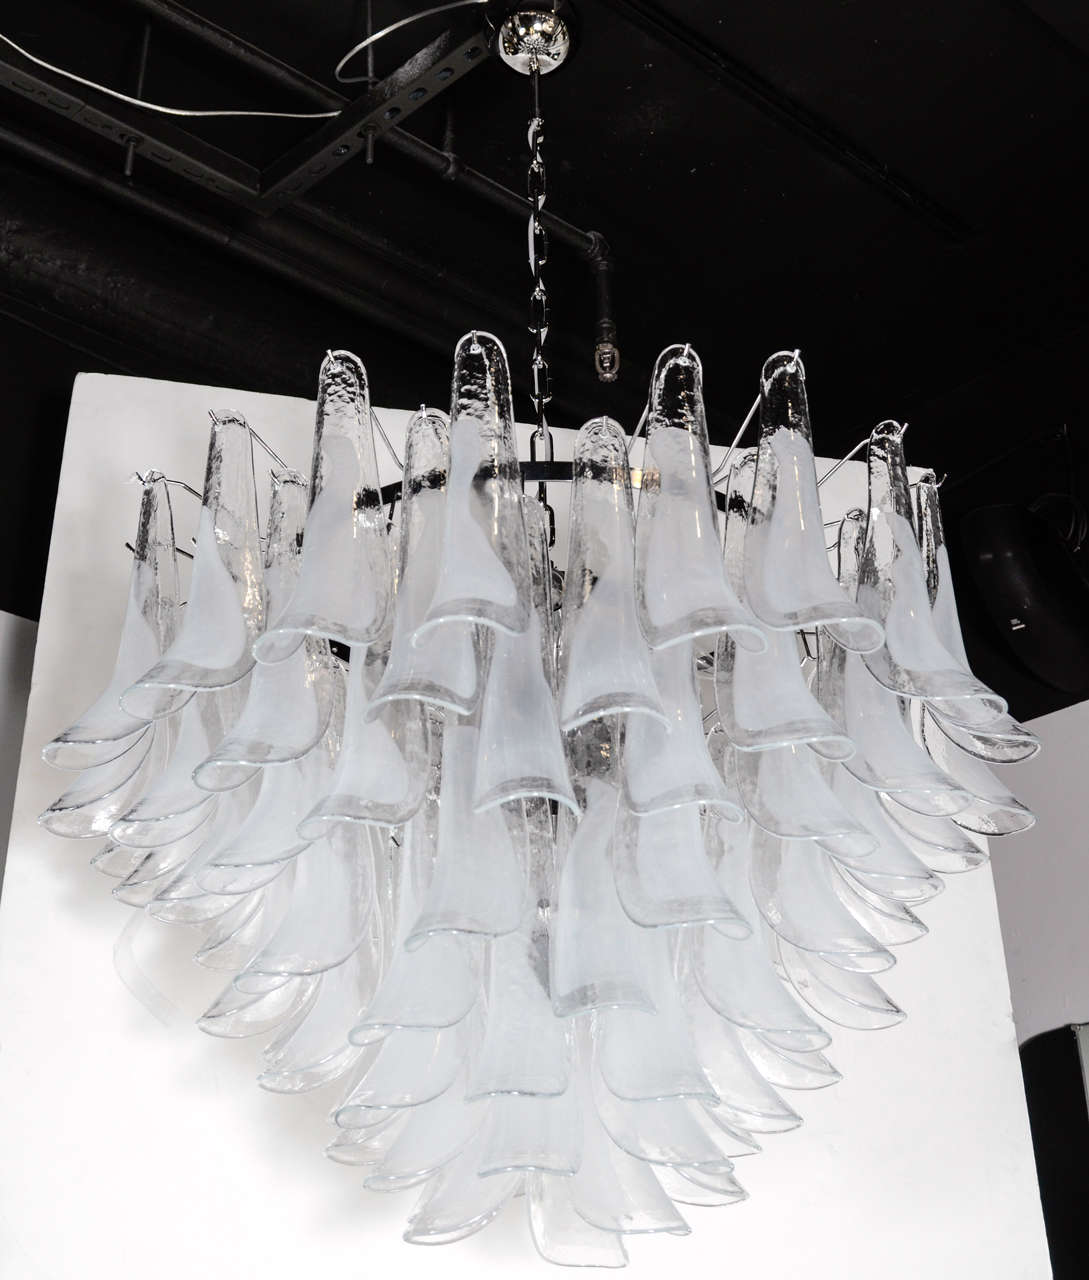 This impressive Mid-Century chandelier consists of a series of feather like Murano Glass shades suspended from a frame that holds twelve chandelier bulbs. This chandelier would make a real statement and would suit a variety of decor's. This piece